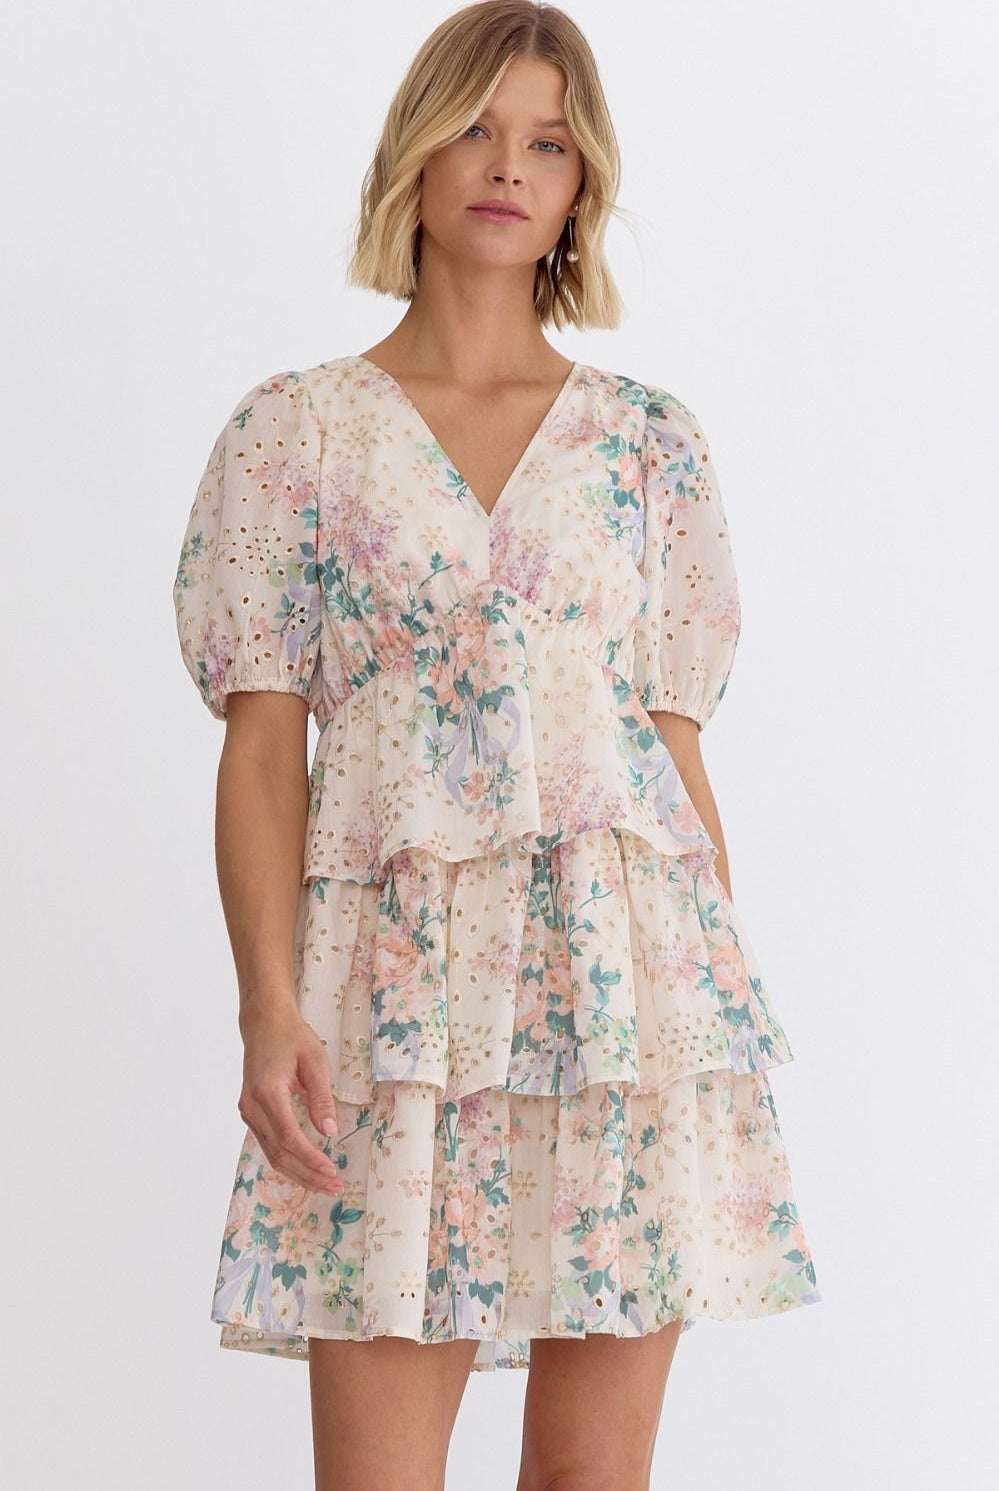 Clementine Floral Print Short Sleeve Dress - Be You Boutique